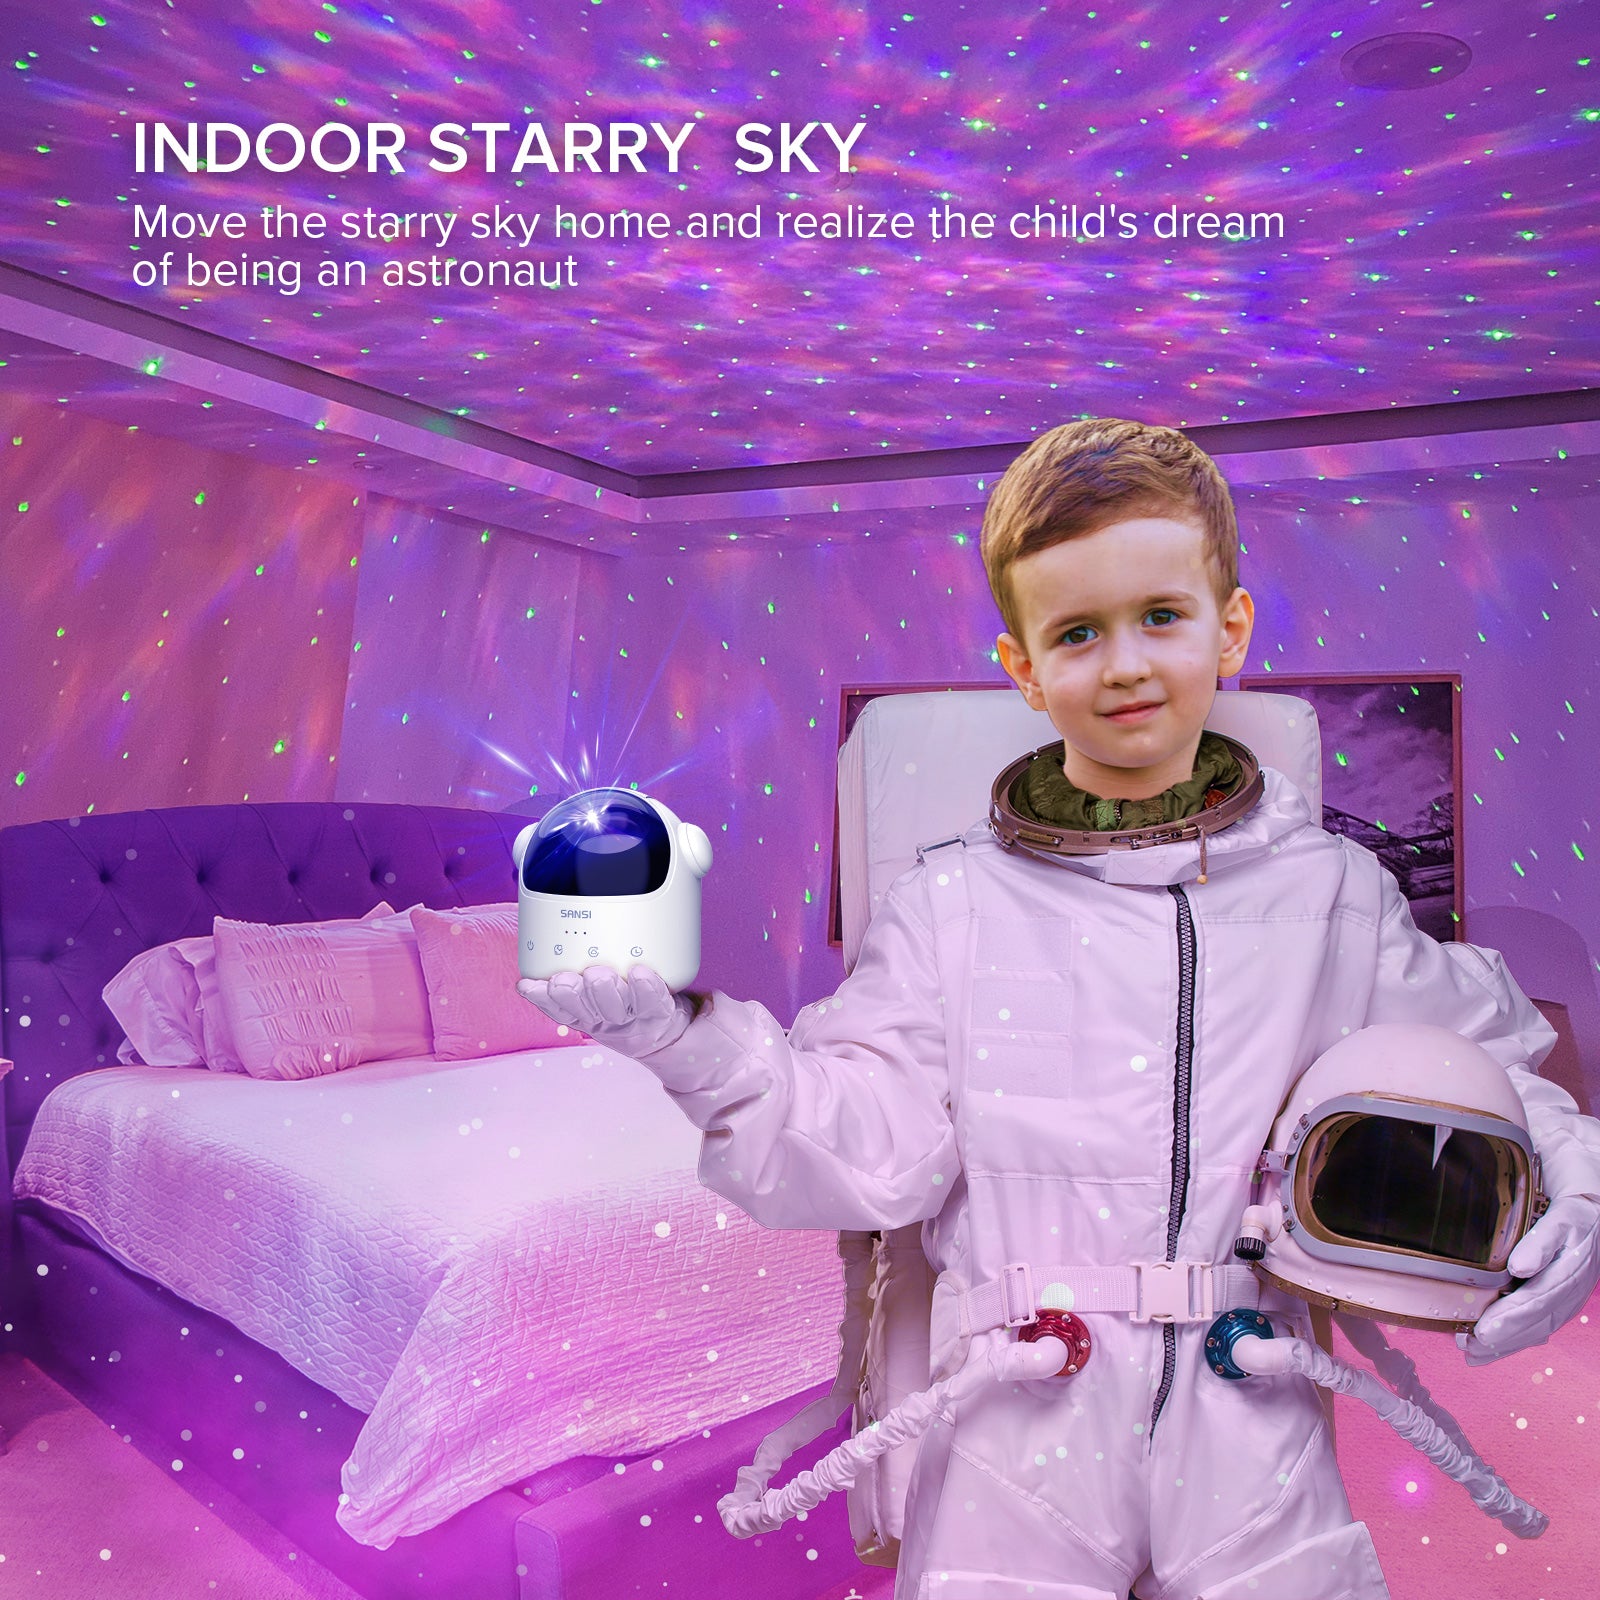 5W Star Projector (US ONLY)，move the starry sky home and realize the child's dream of being an astronaut.